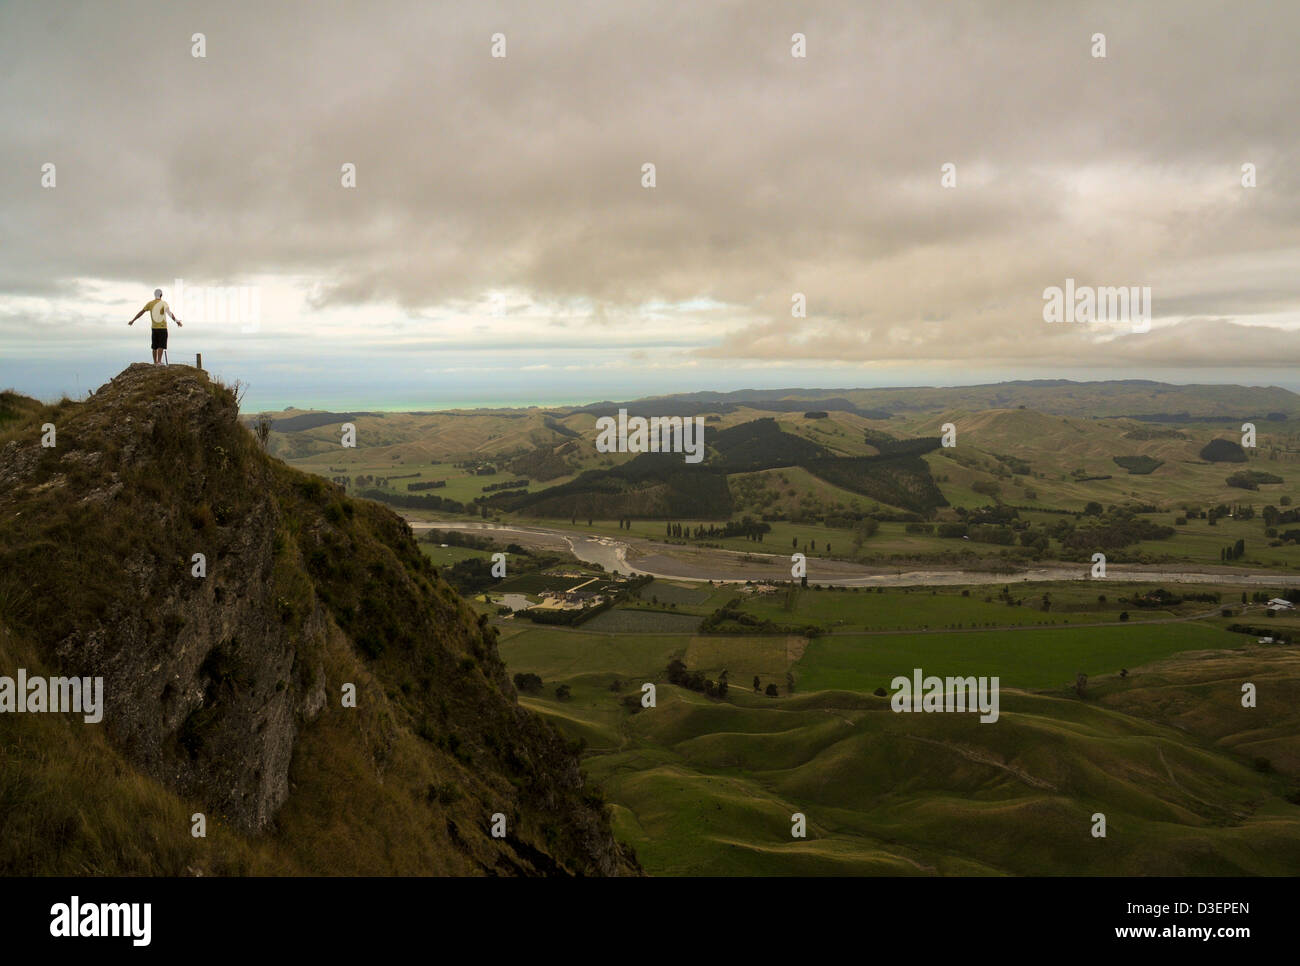 A man feels the power of nature atop a hill in Hawke's Bay,  New Zealand. Stock Photo